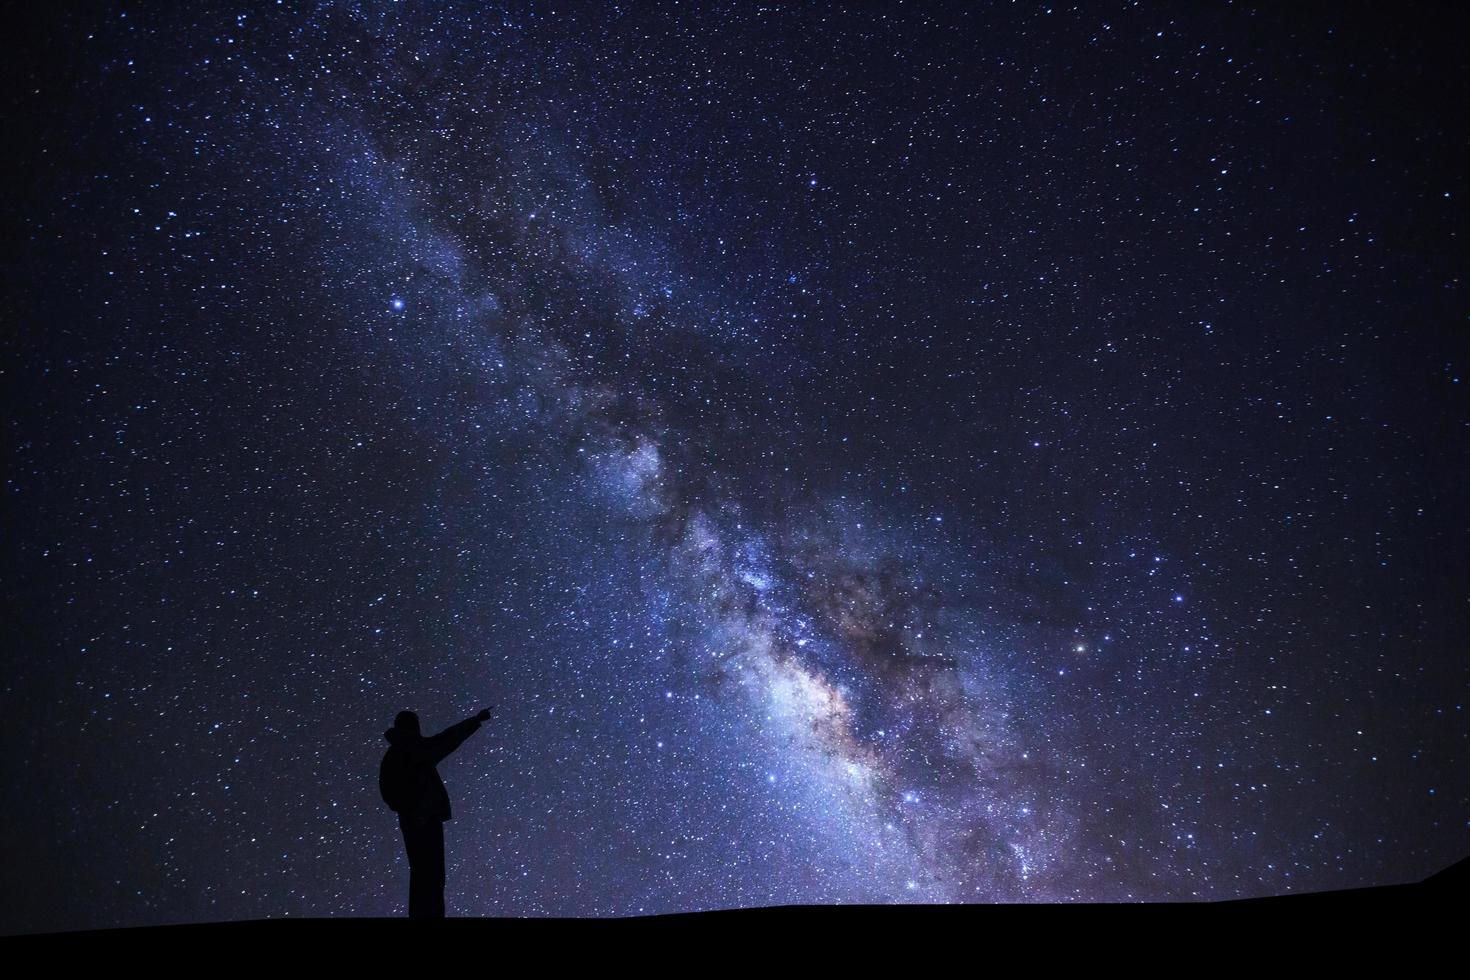 A Man is standing pointing on a bright star with milky way galaxy and space dust in the universe photo